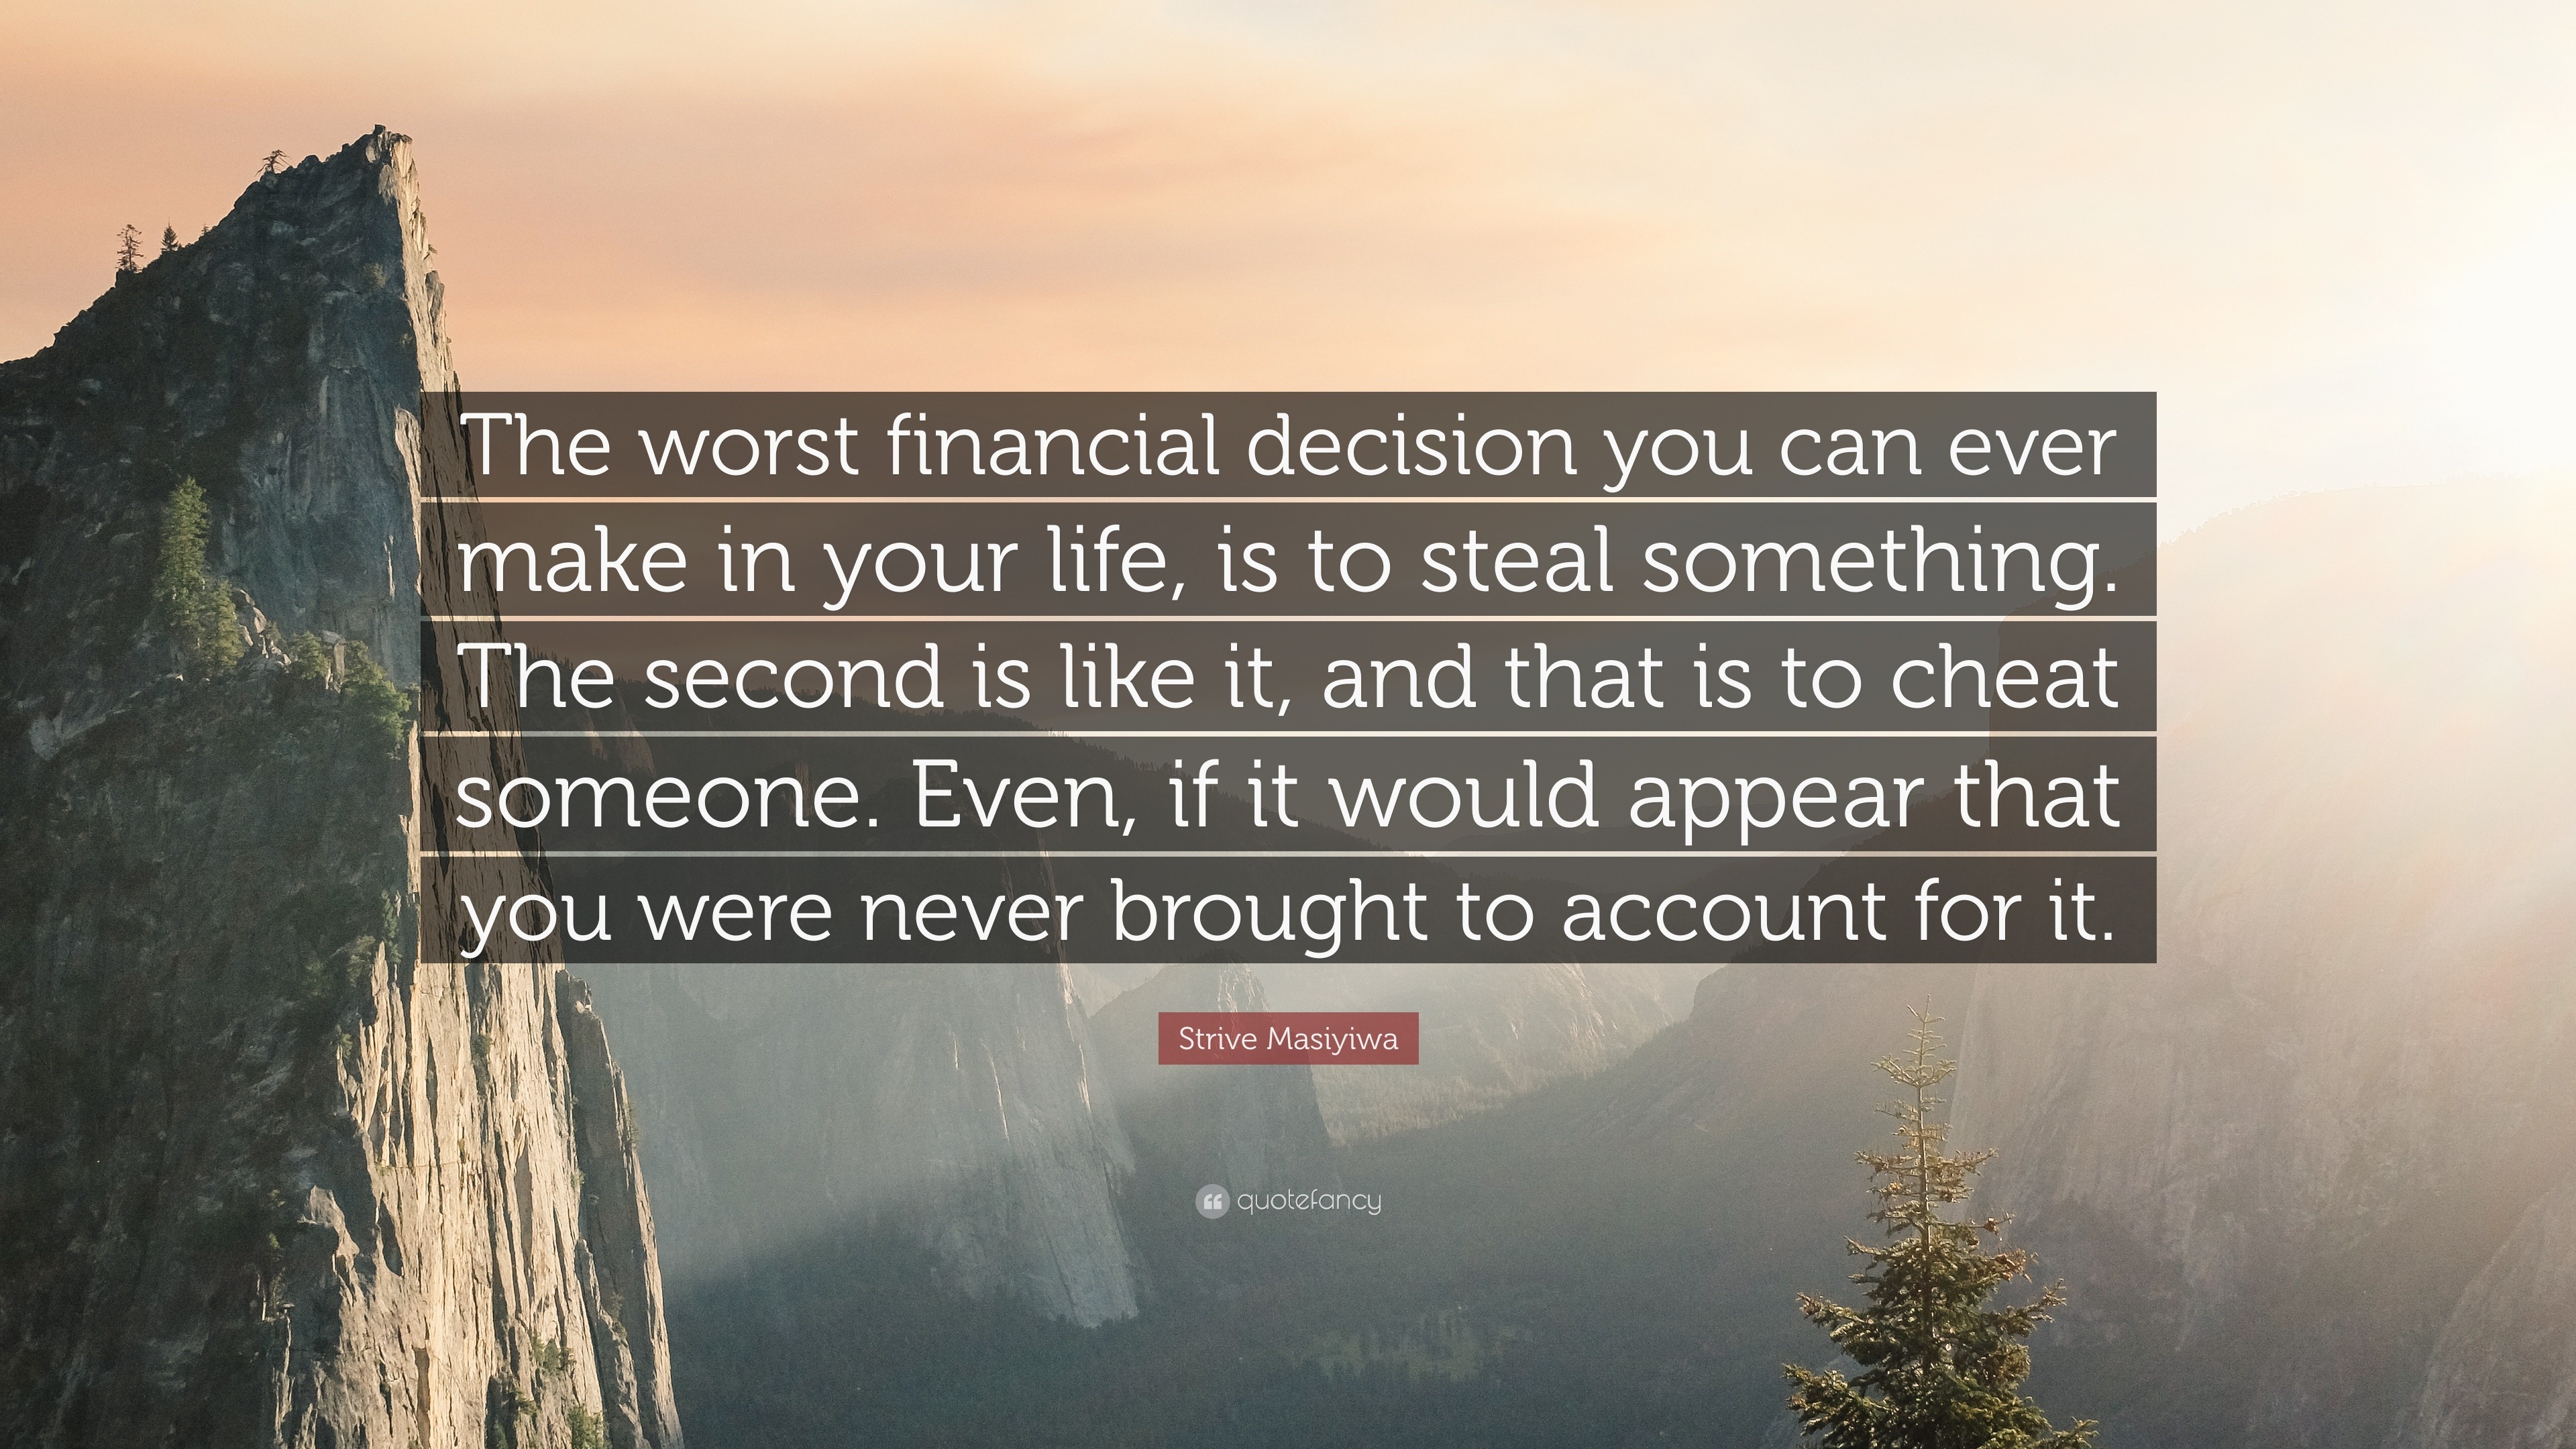 Strive Masiyiwa Quote “The worst financial decision you can ever make